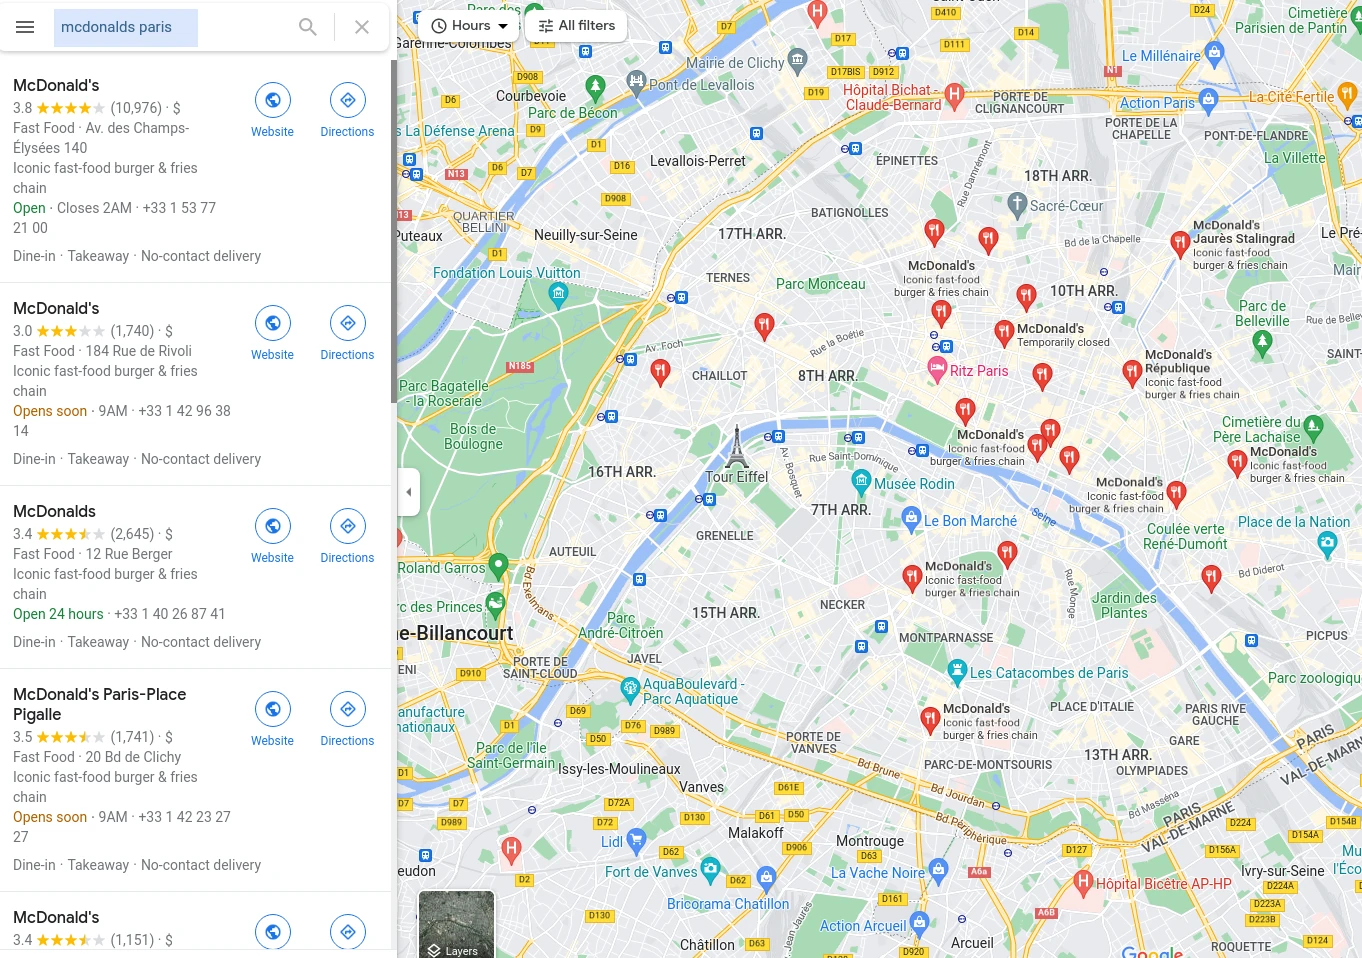 screen capture of google maps multi result search query